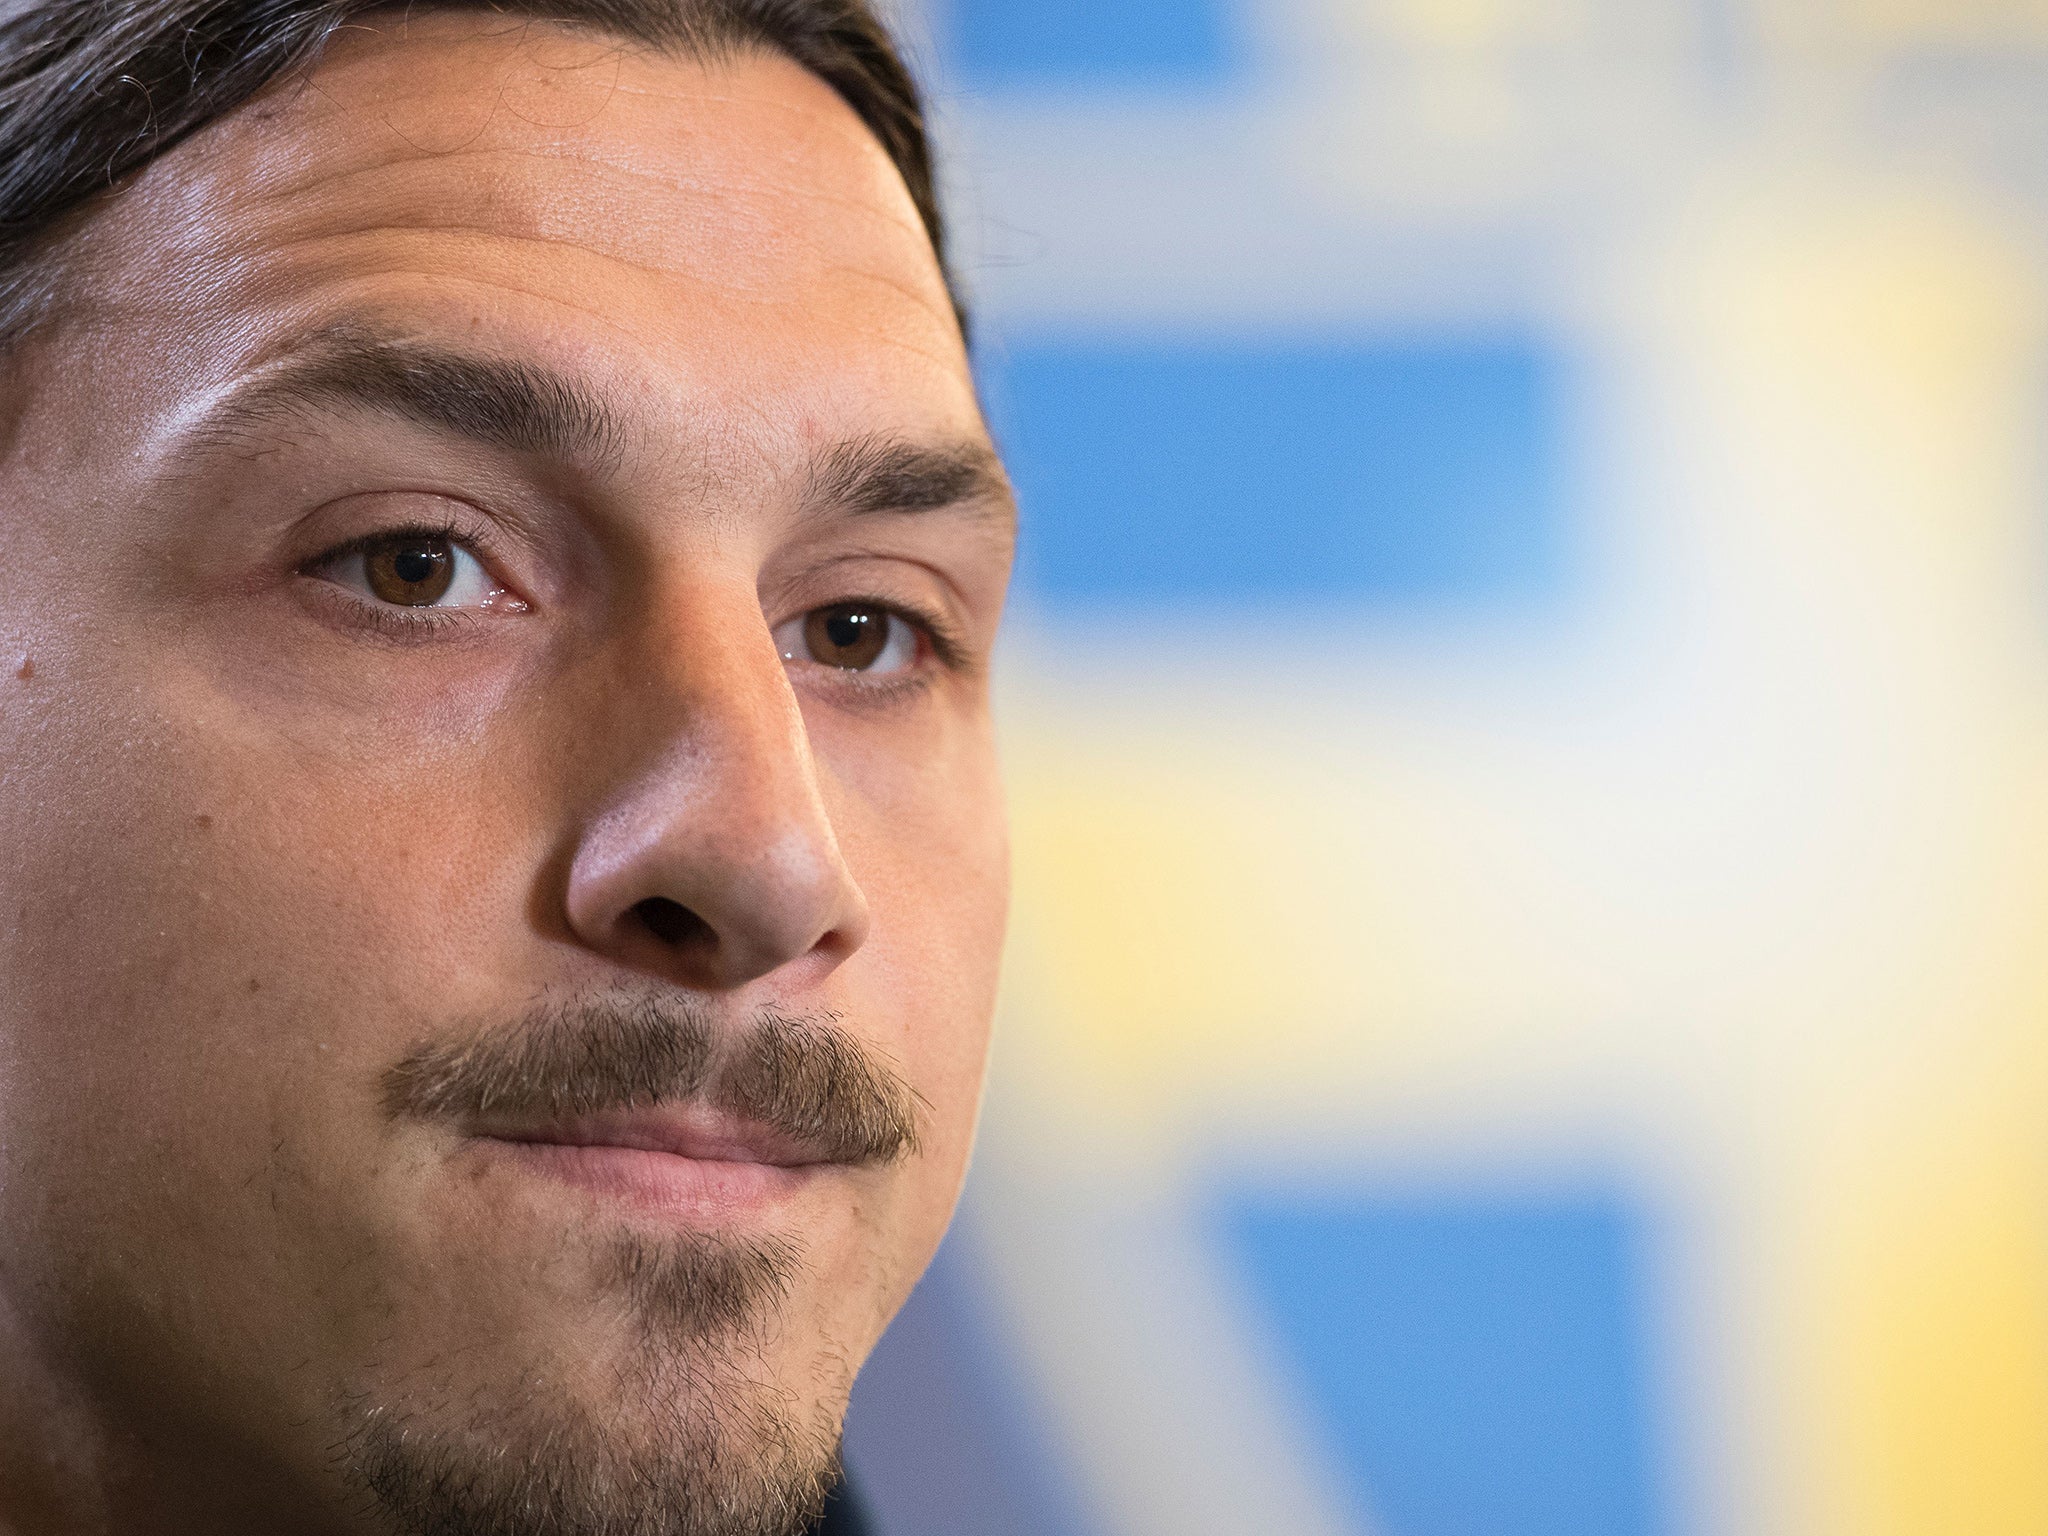 Ibrahimovic's contract with Paris Saint-Germain expires in the summer